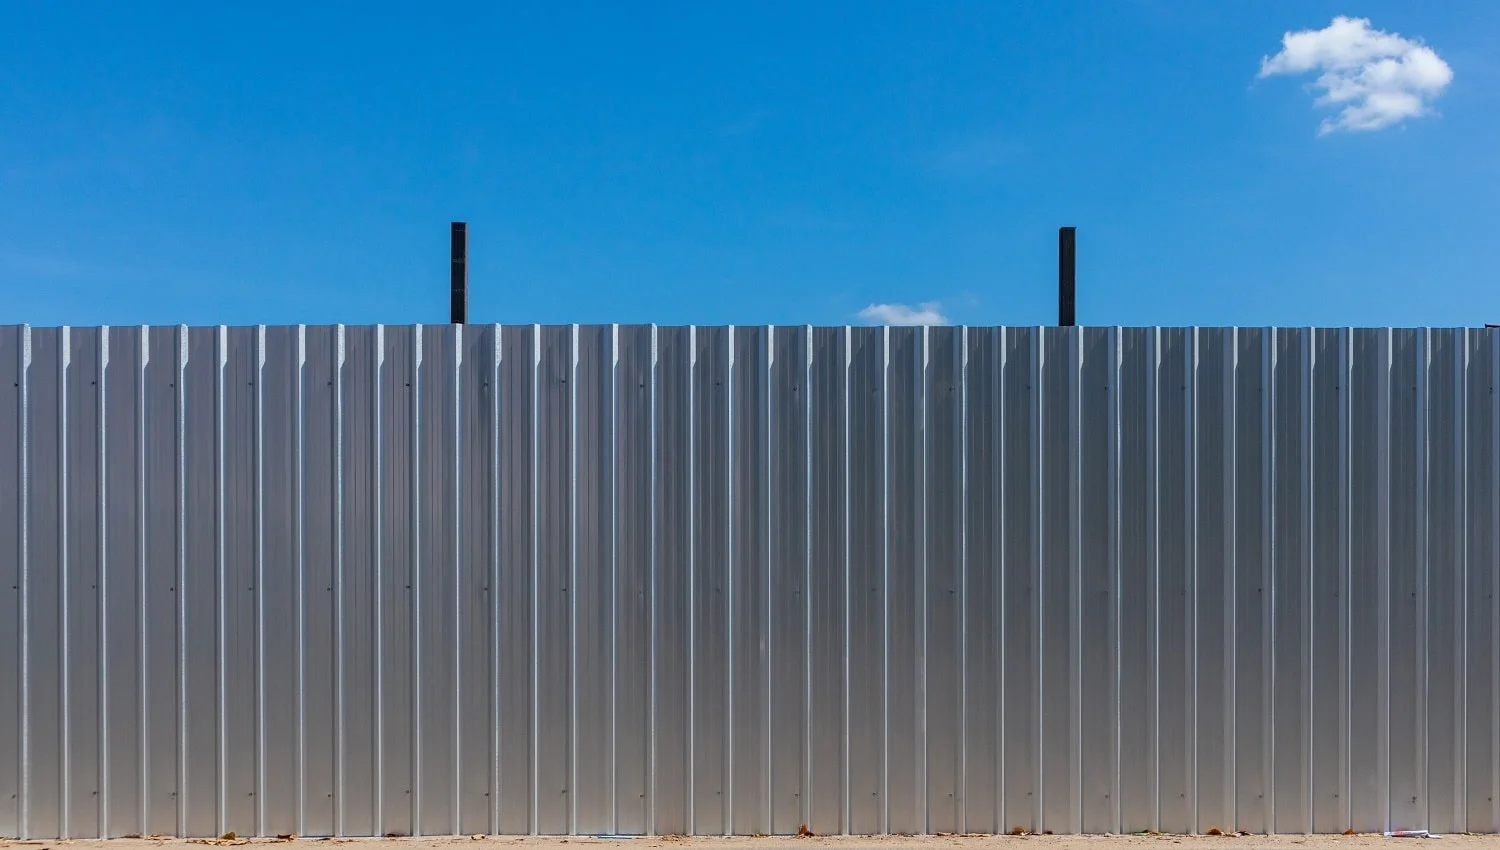 Clean aluminium fence to protect construction area.